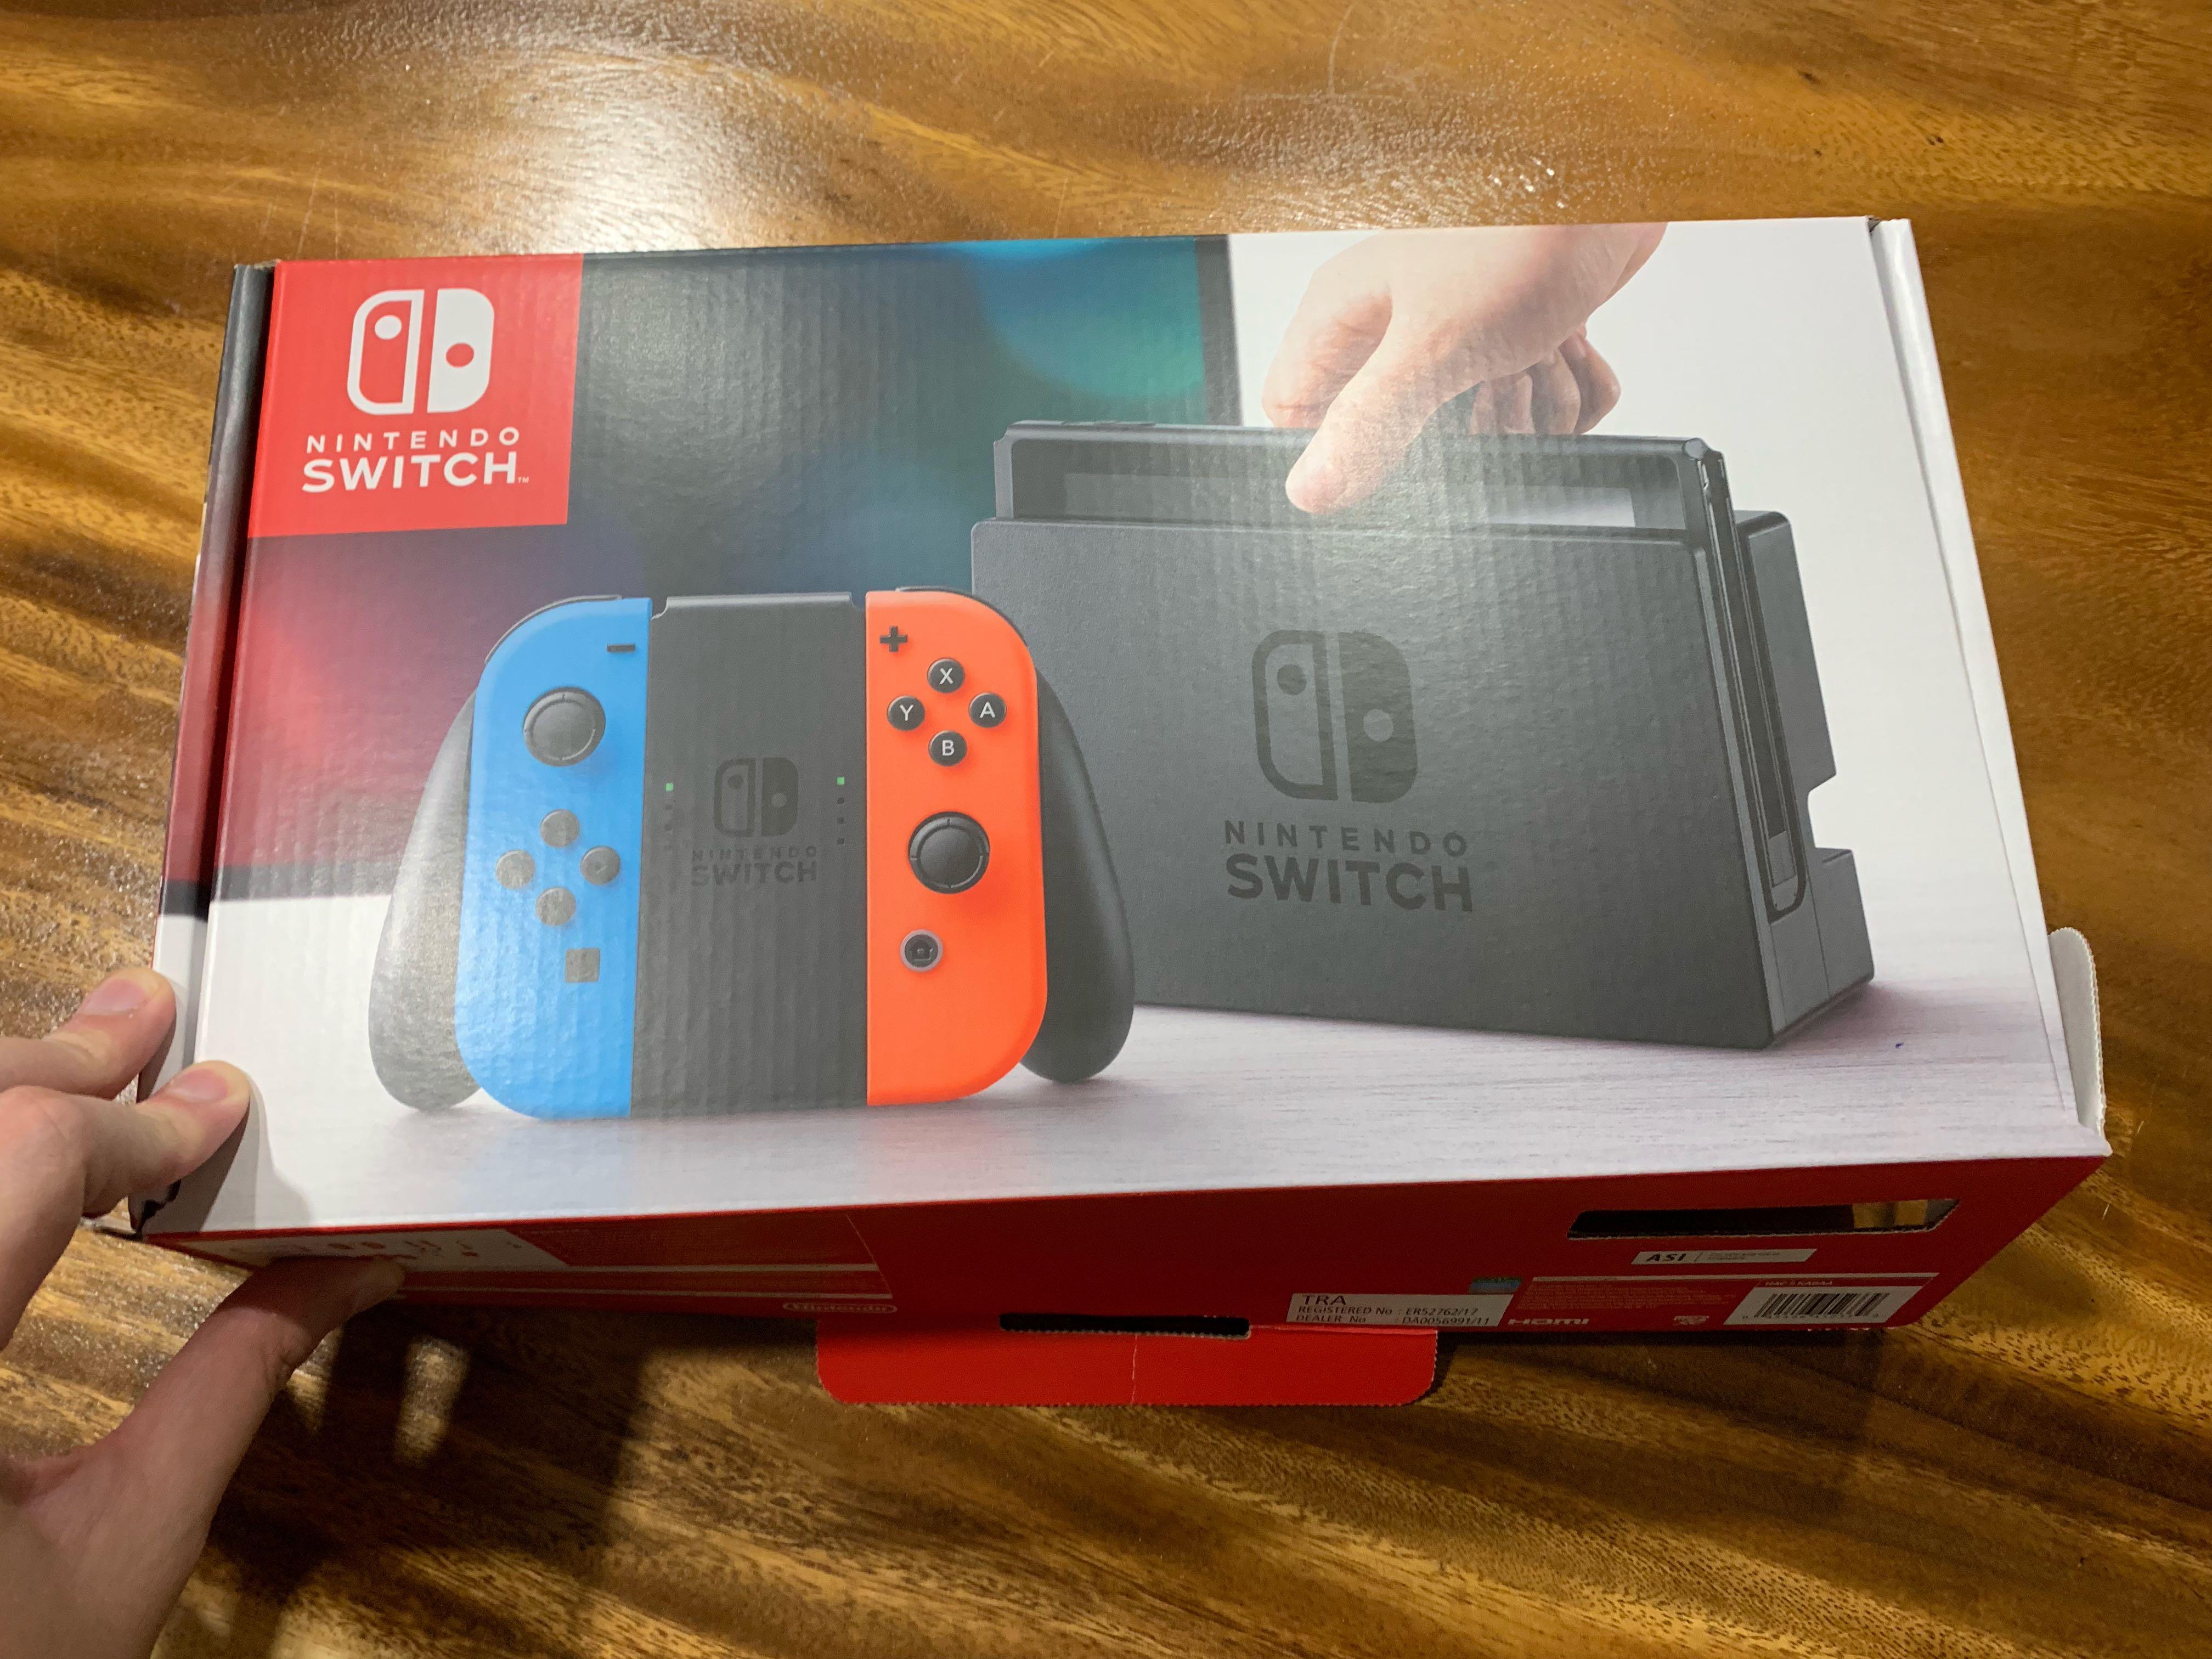 pre owned switch console